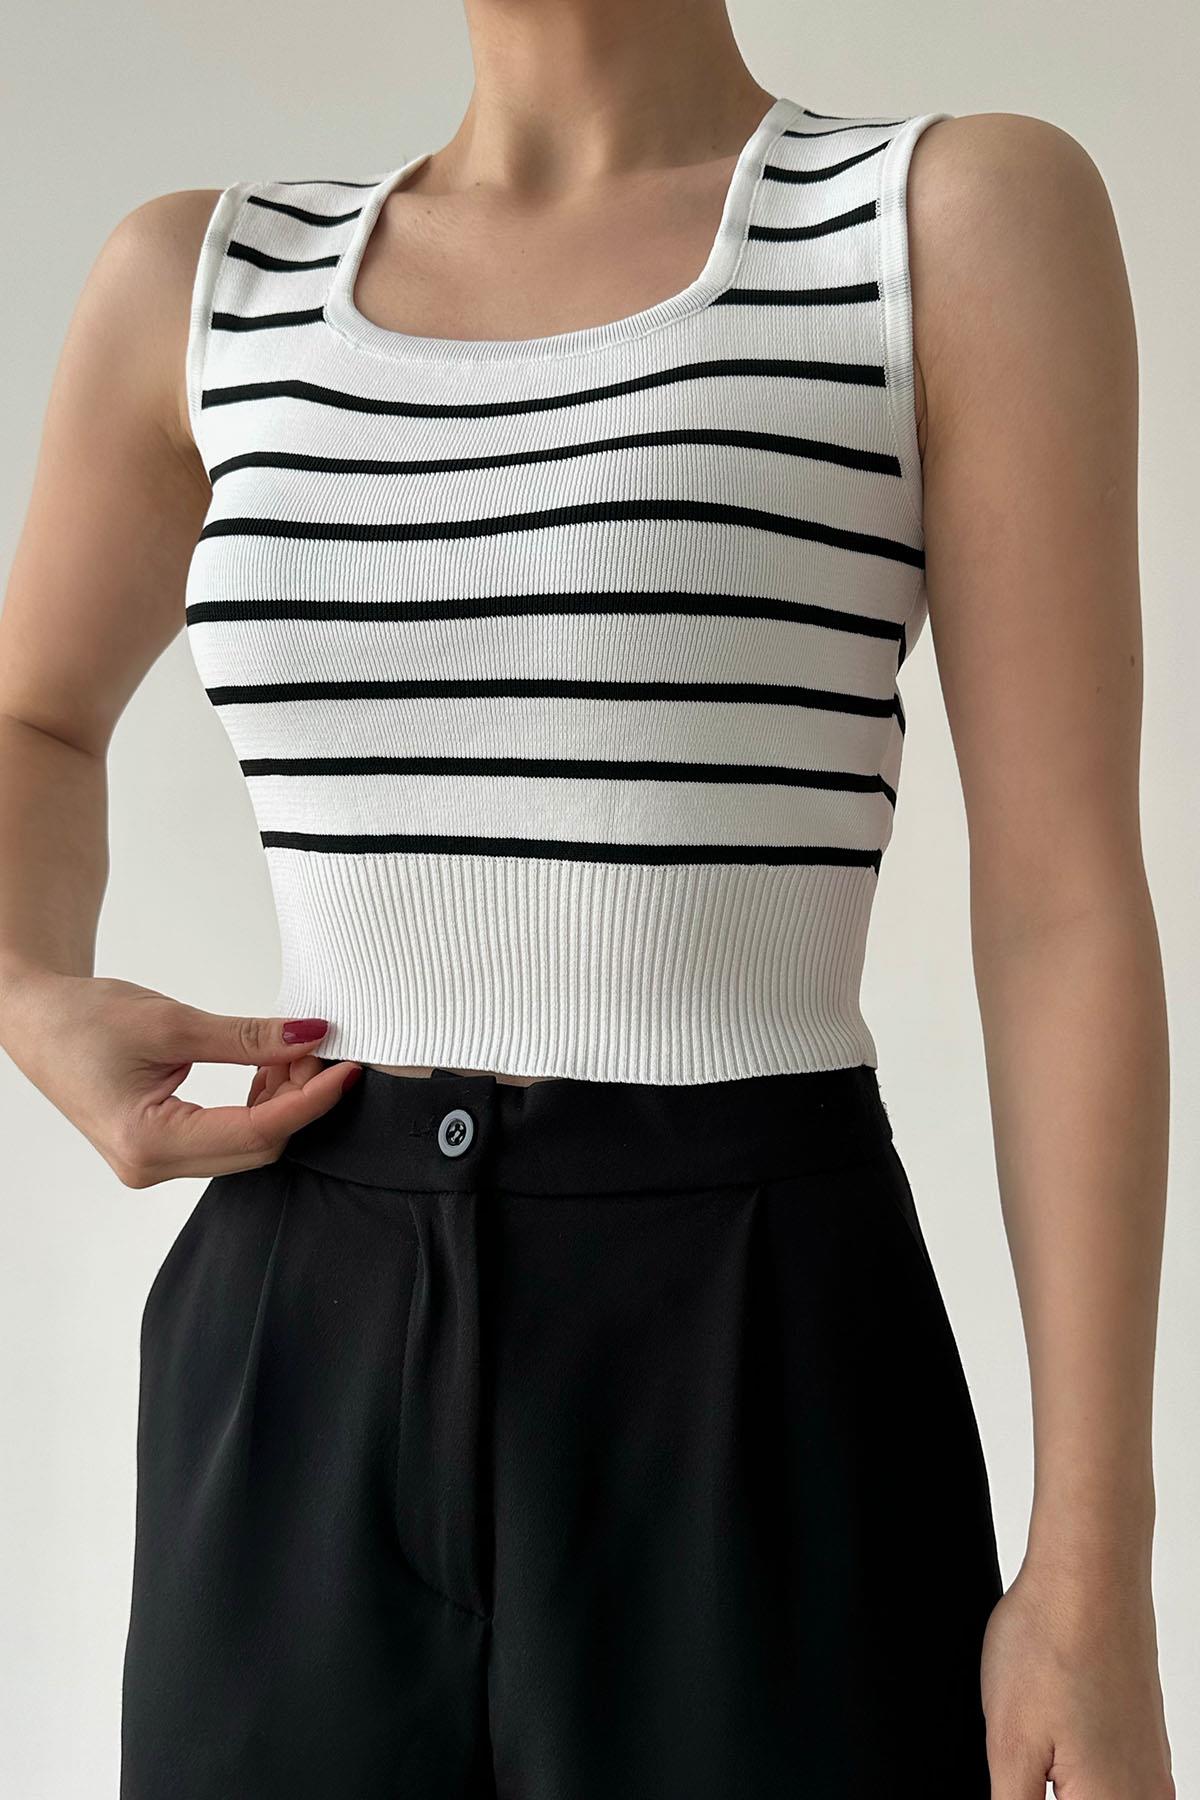 A wholesale clothing model wears Striped Ribbed Knitwear Singlet - White-Black, Turkish wholesale Undershirt of Qustyle